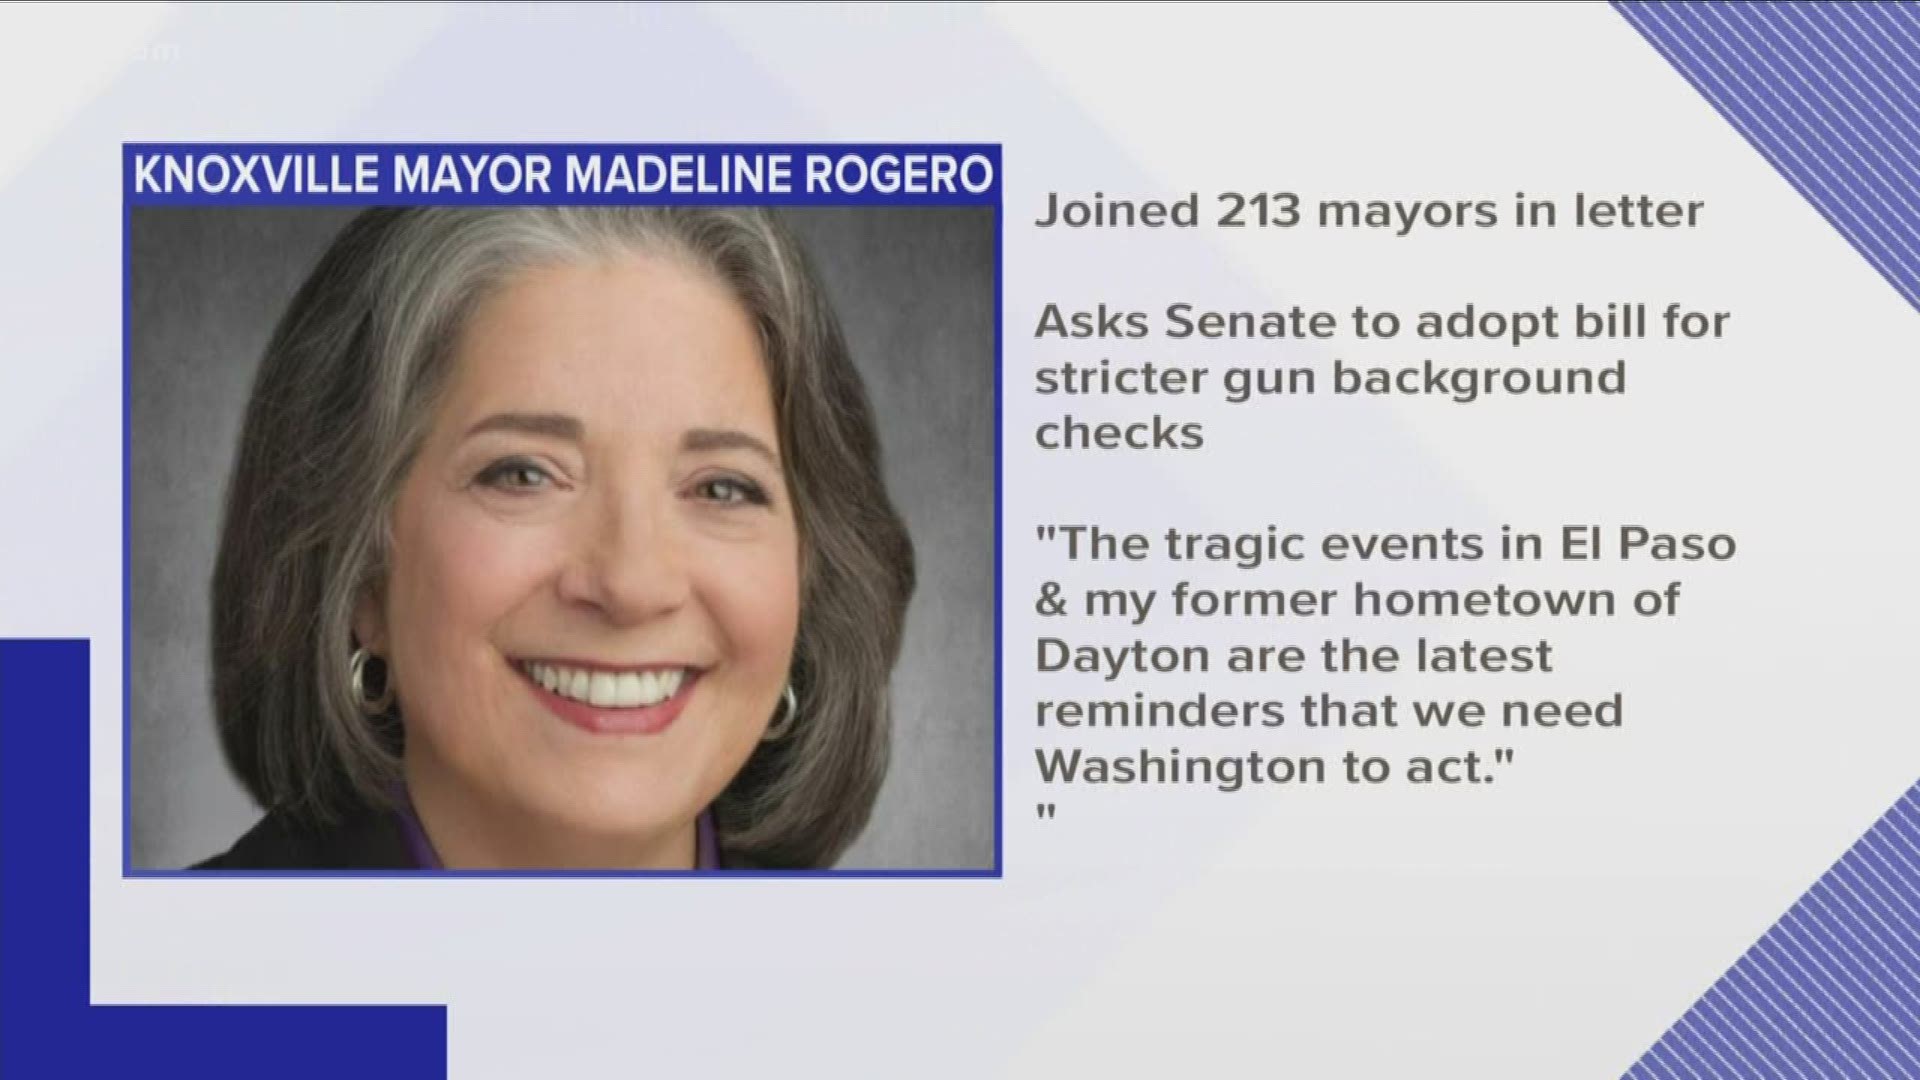 Knoxville Mayor Madeline Rogero has joined more than 200 other mayors in a push for gun safety legislation.